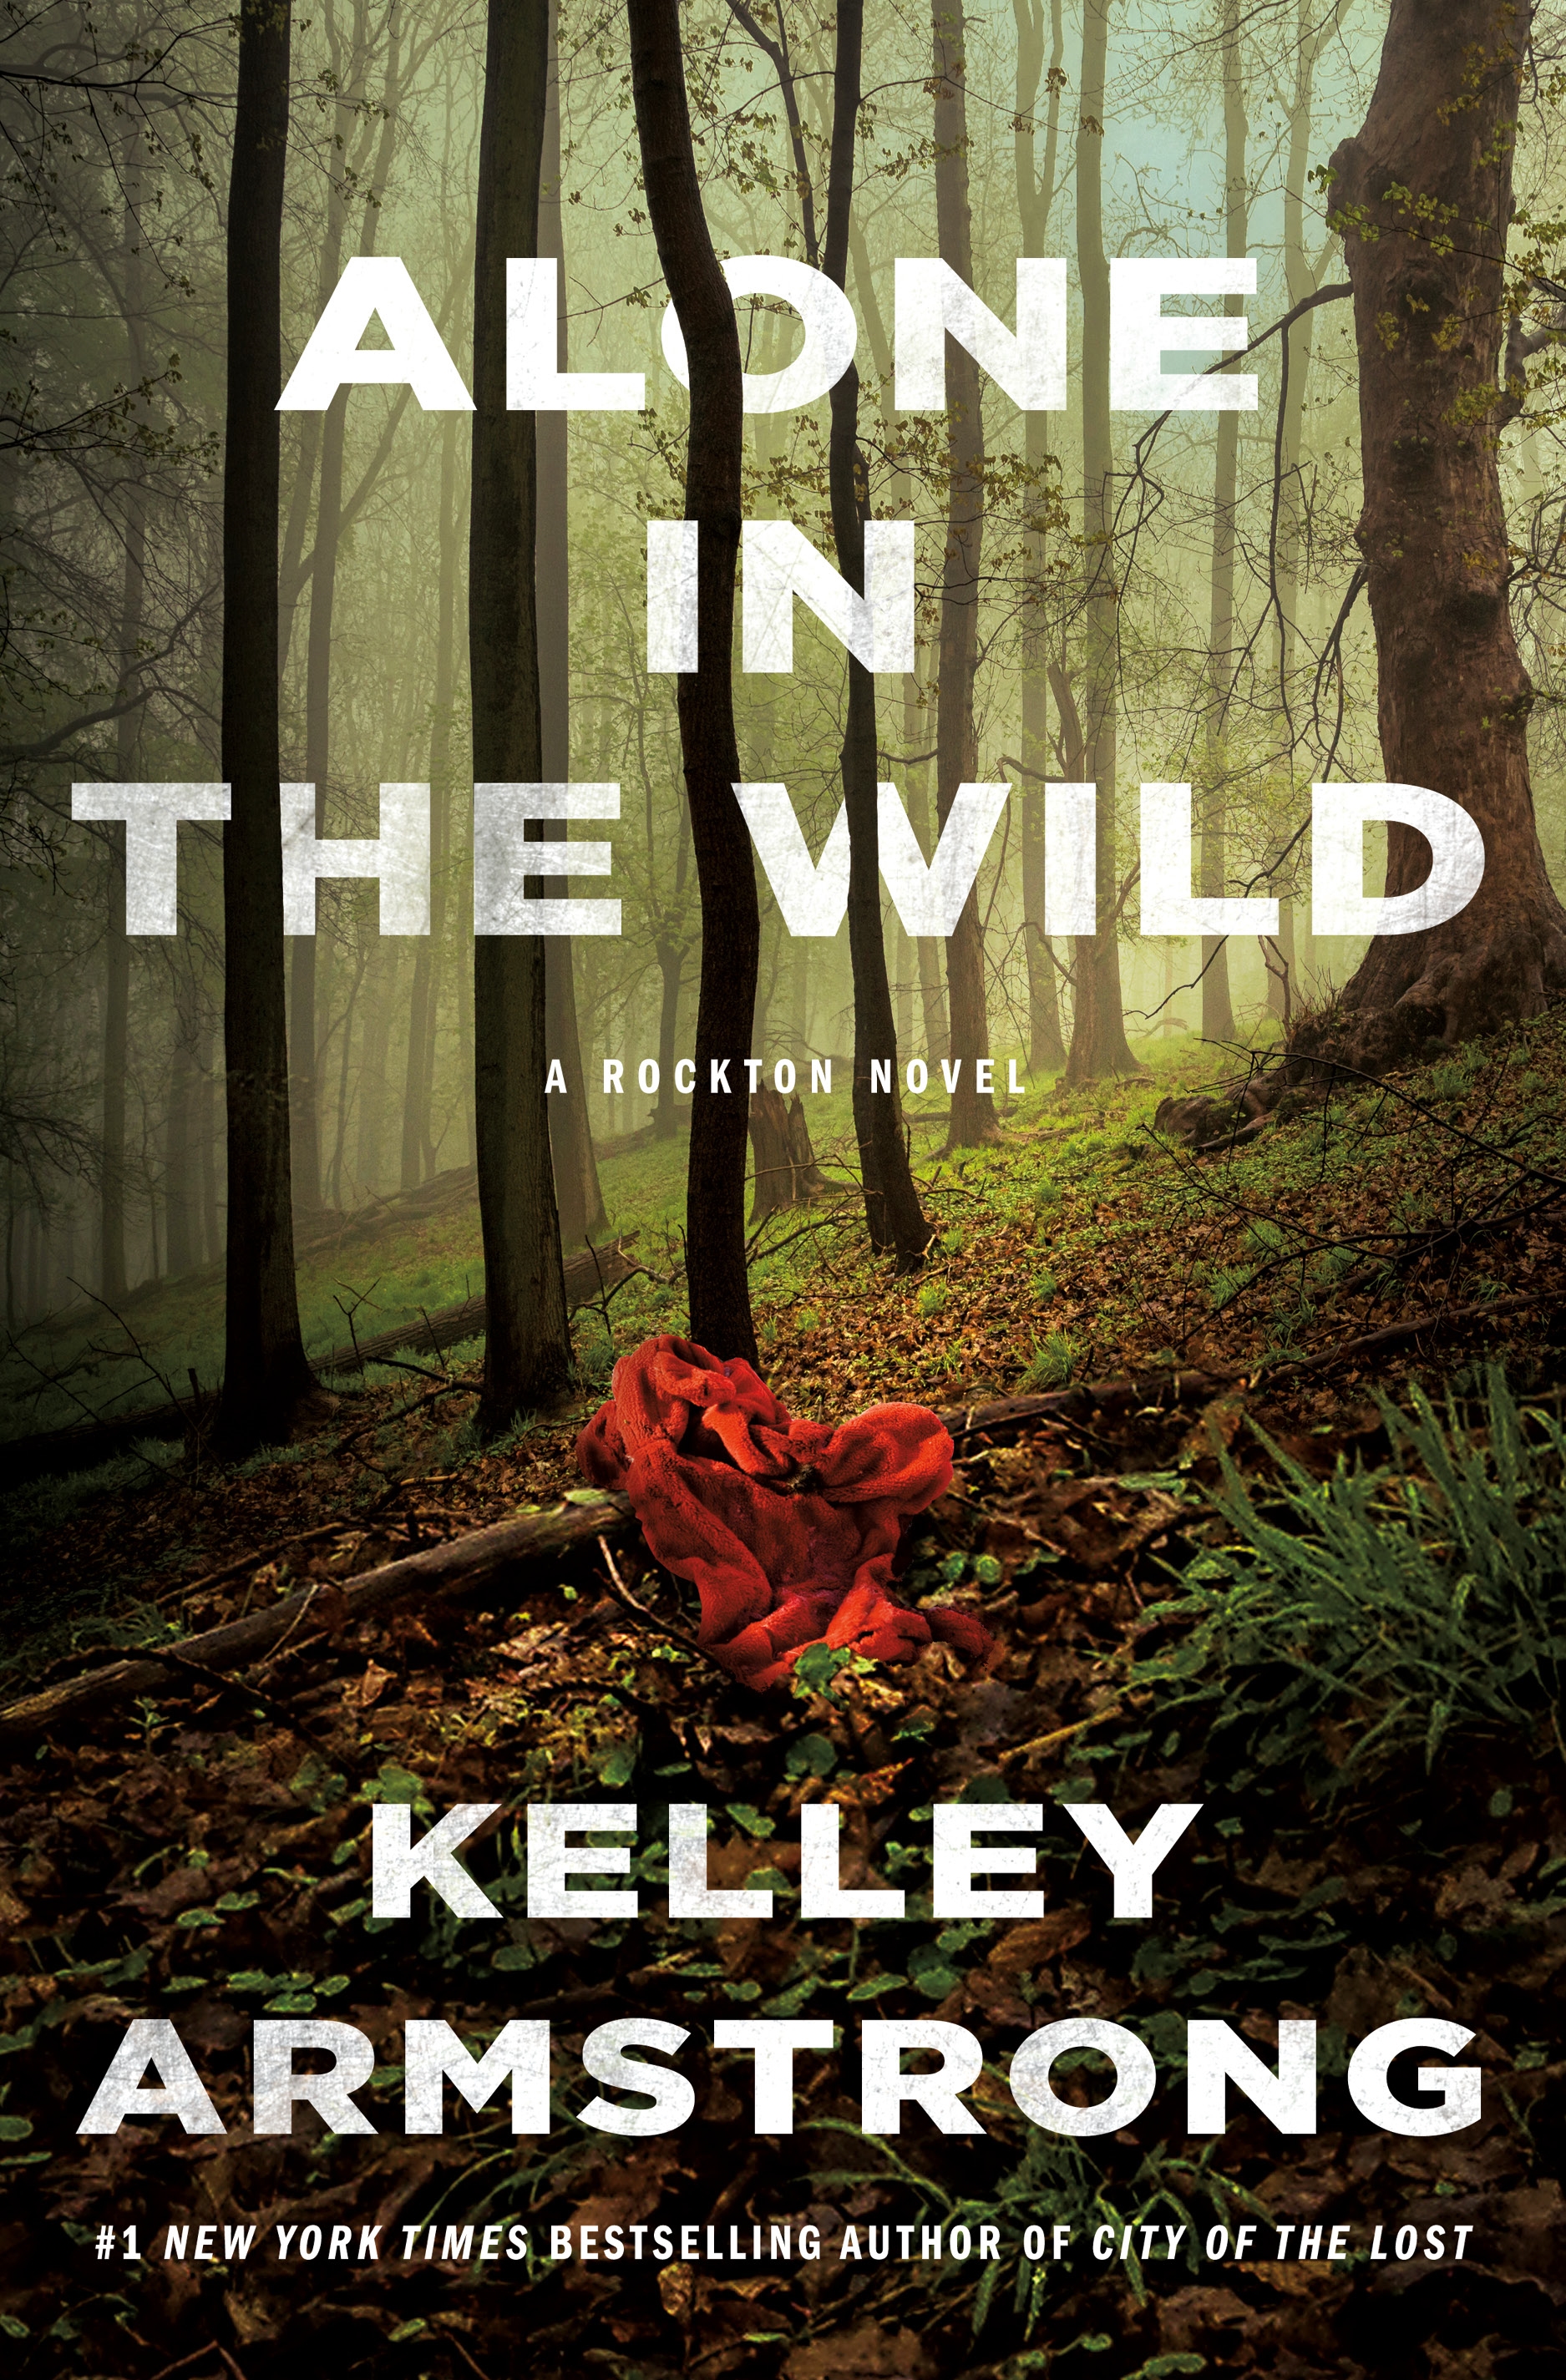 Book “Alone in the Wild” by Kelley Armstrong